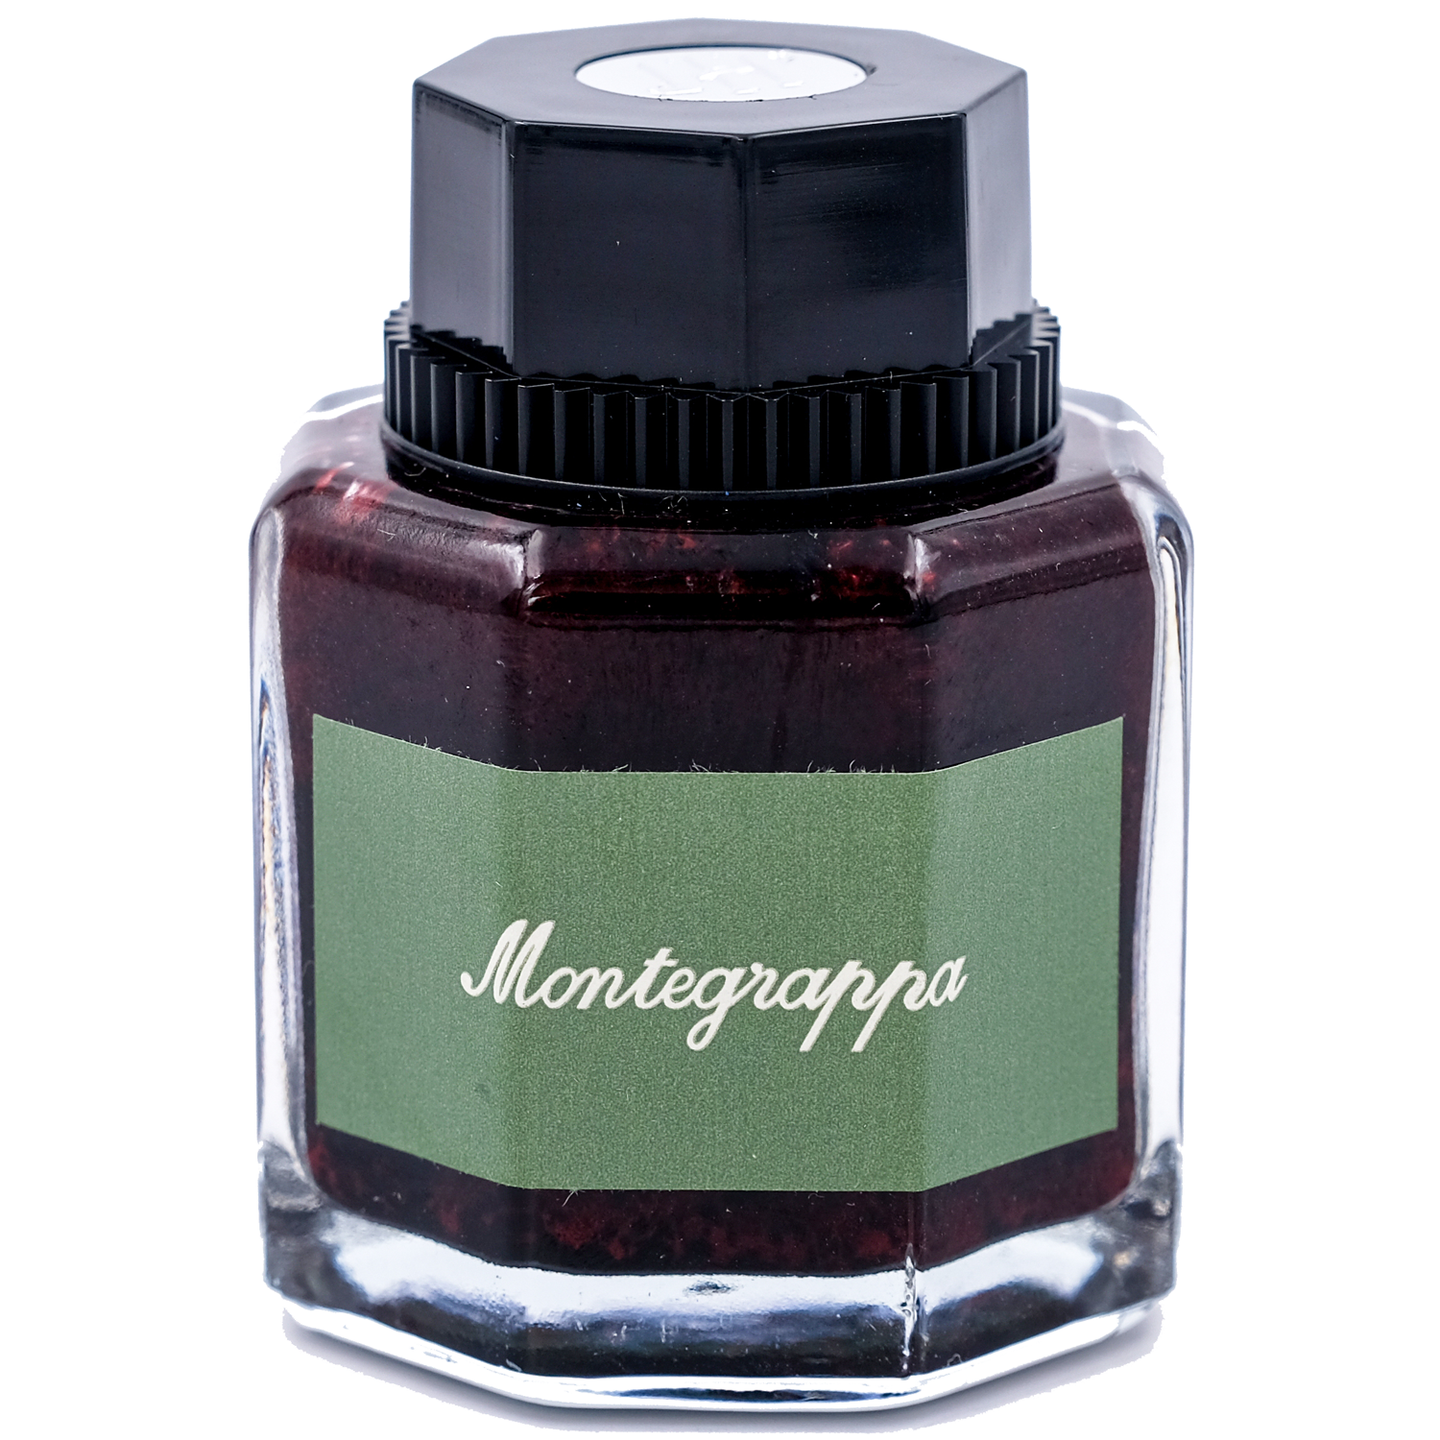 Montegrappa Tinte Bordeaux 50ml - Green packaging